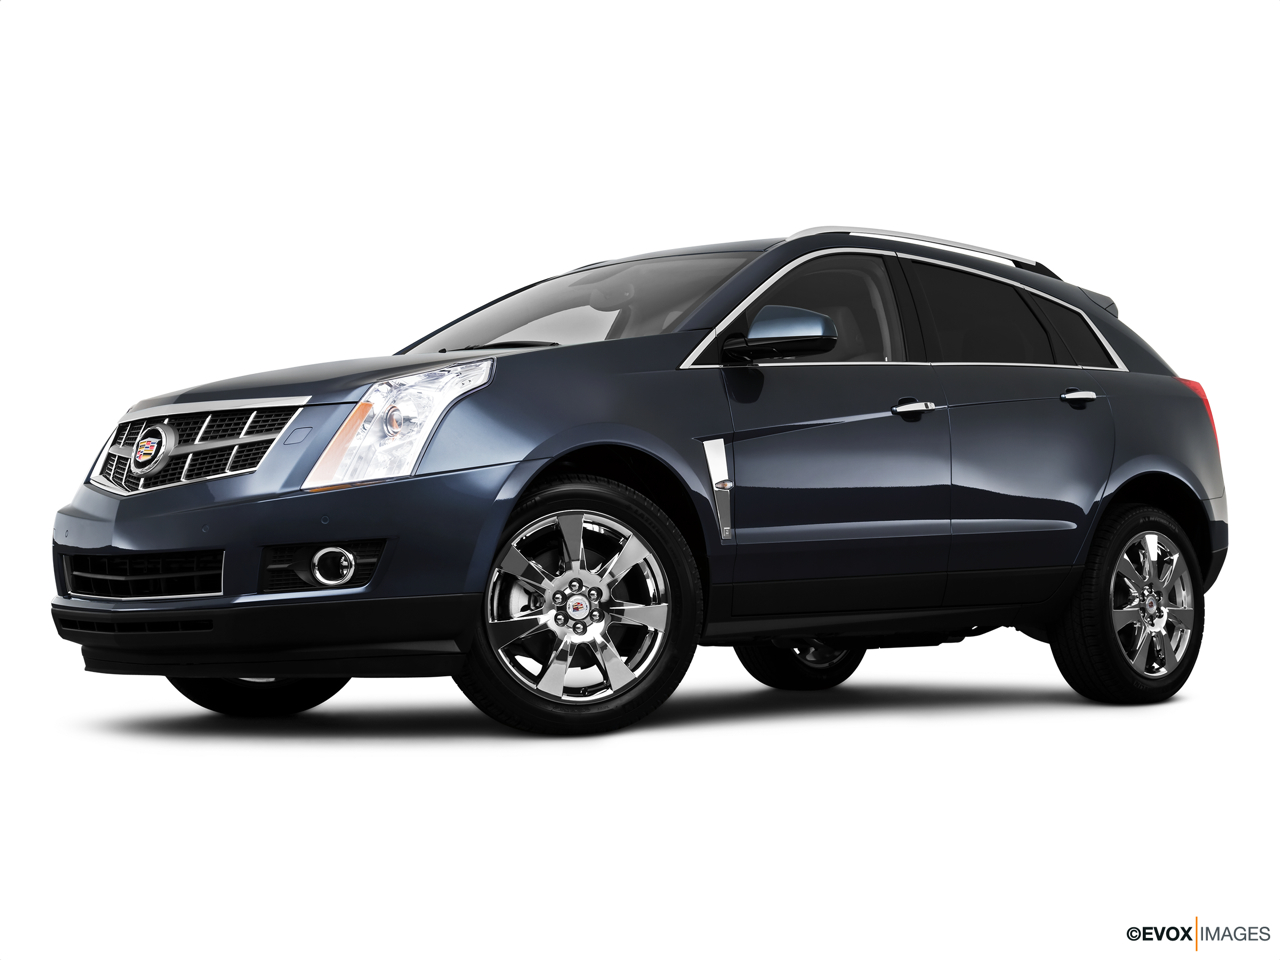 2010 Cadillac SRX Crossover Premium Collection Low/wide front 5/8. 